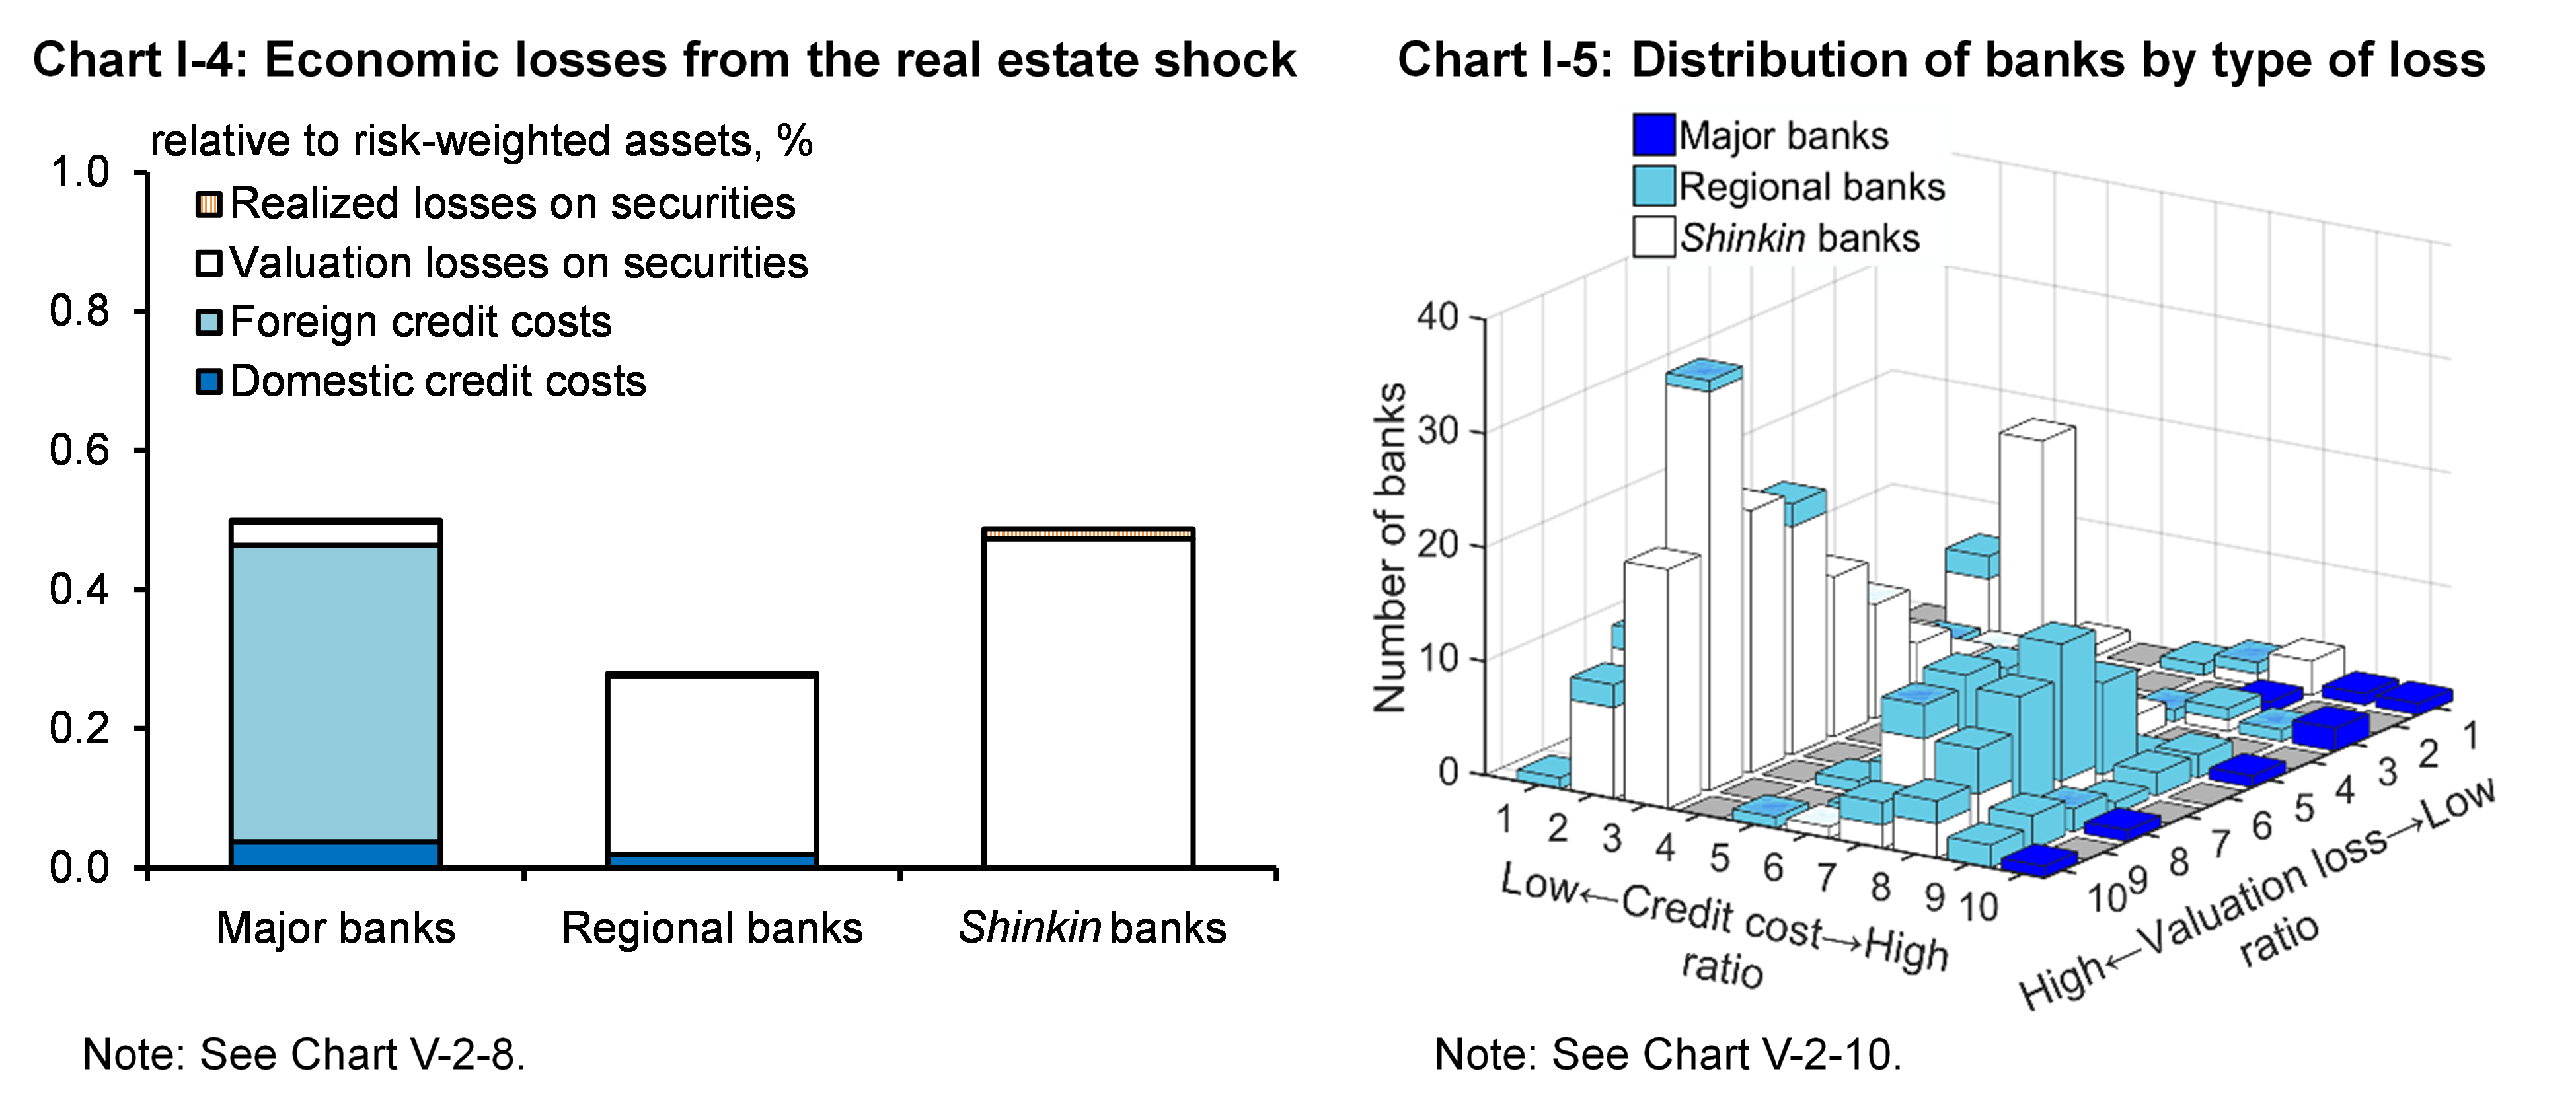 Chart I-4 shows Economic losses from the real estate shock, and Chart I-5 shows Distribution of banks by type of loss.